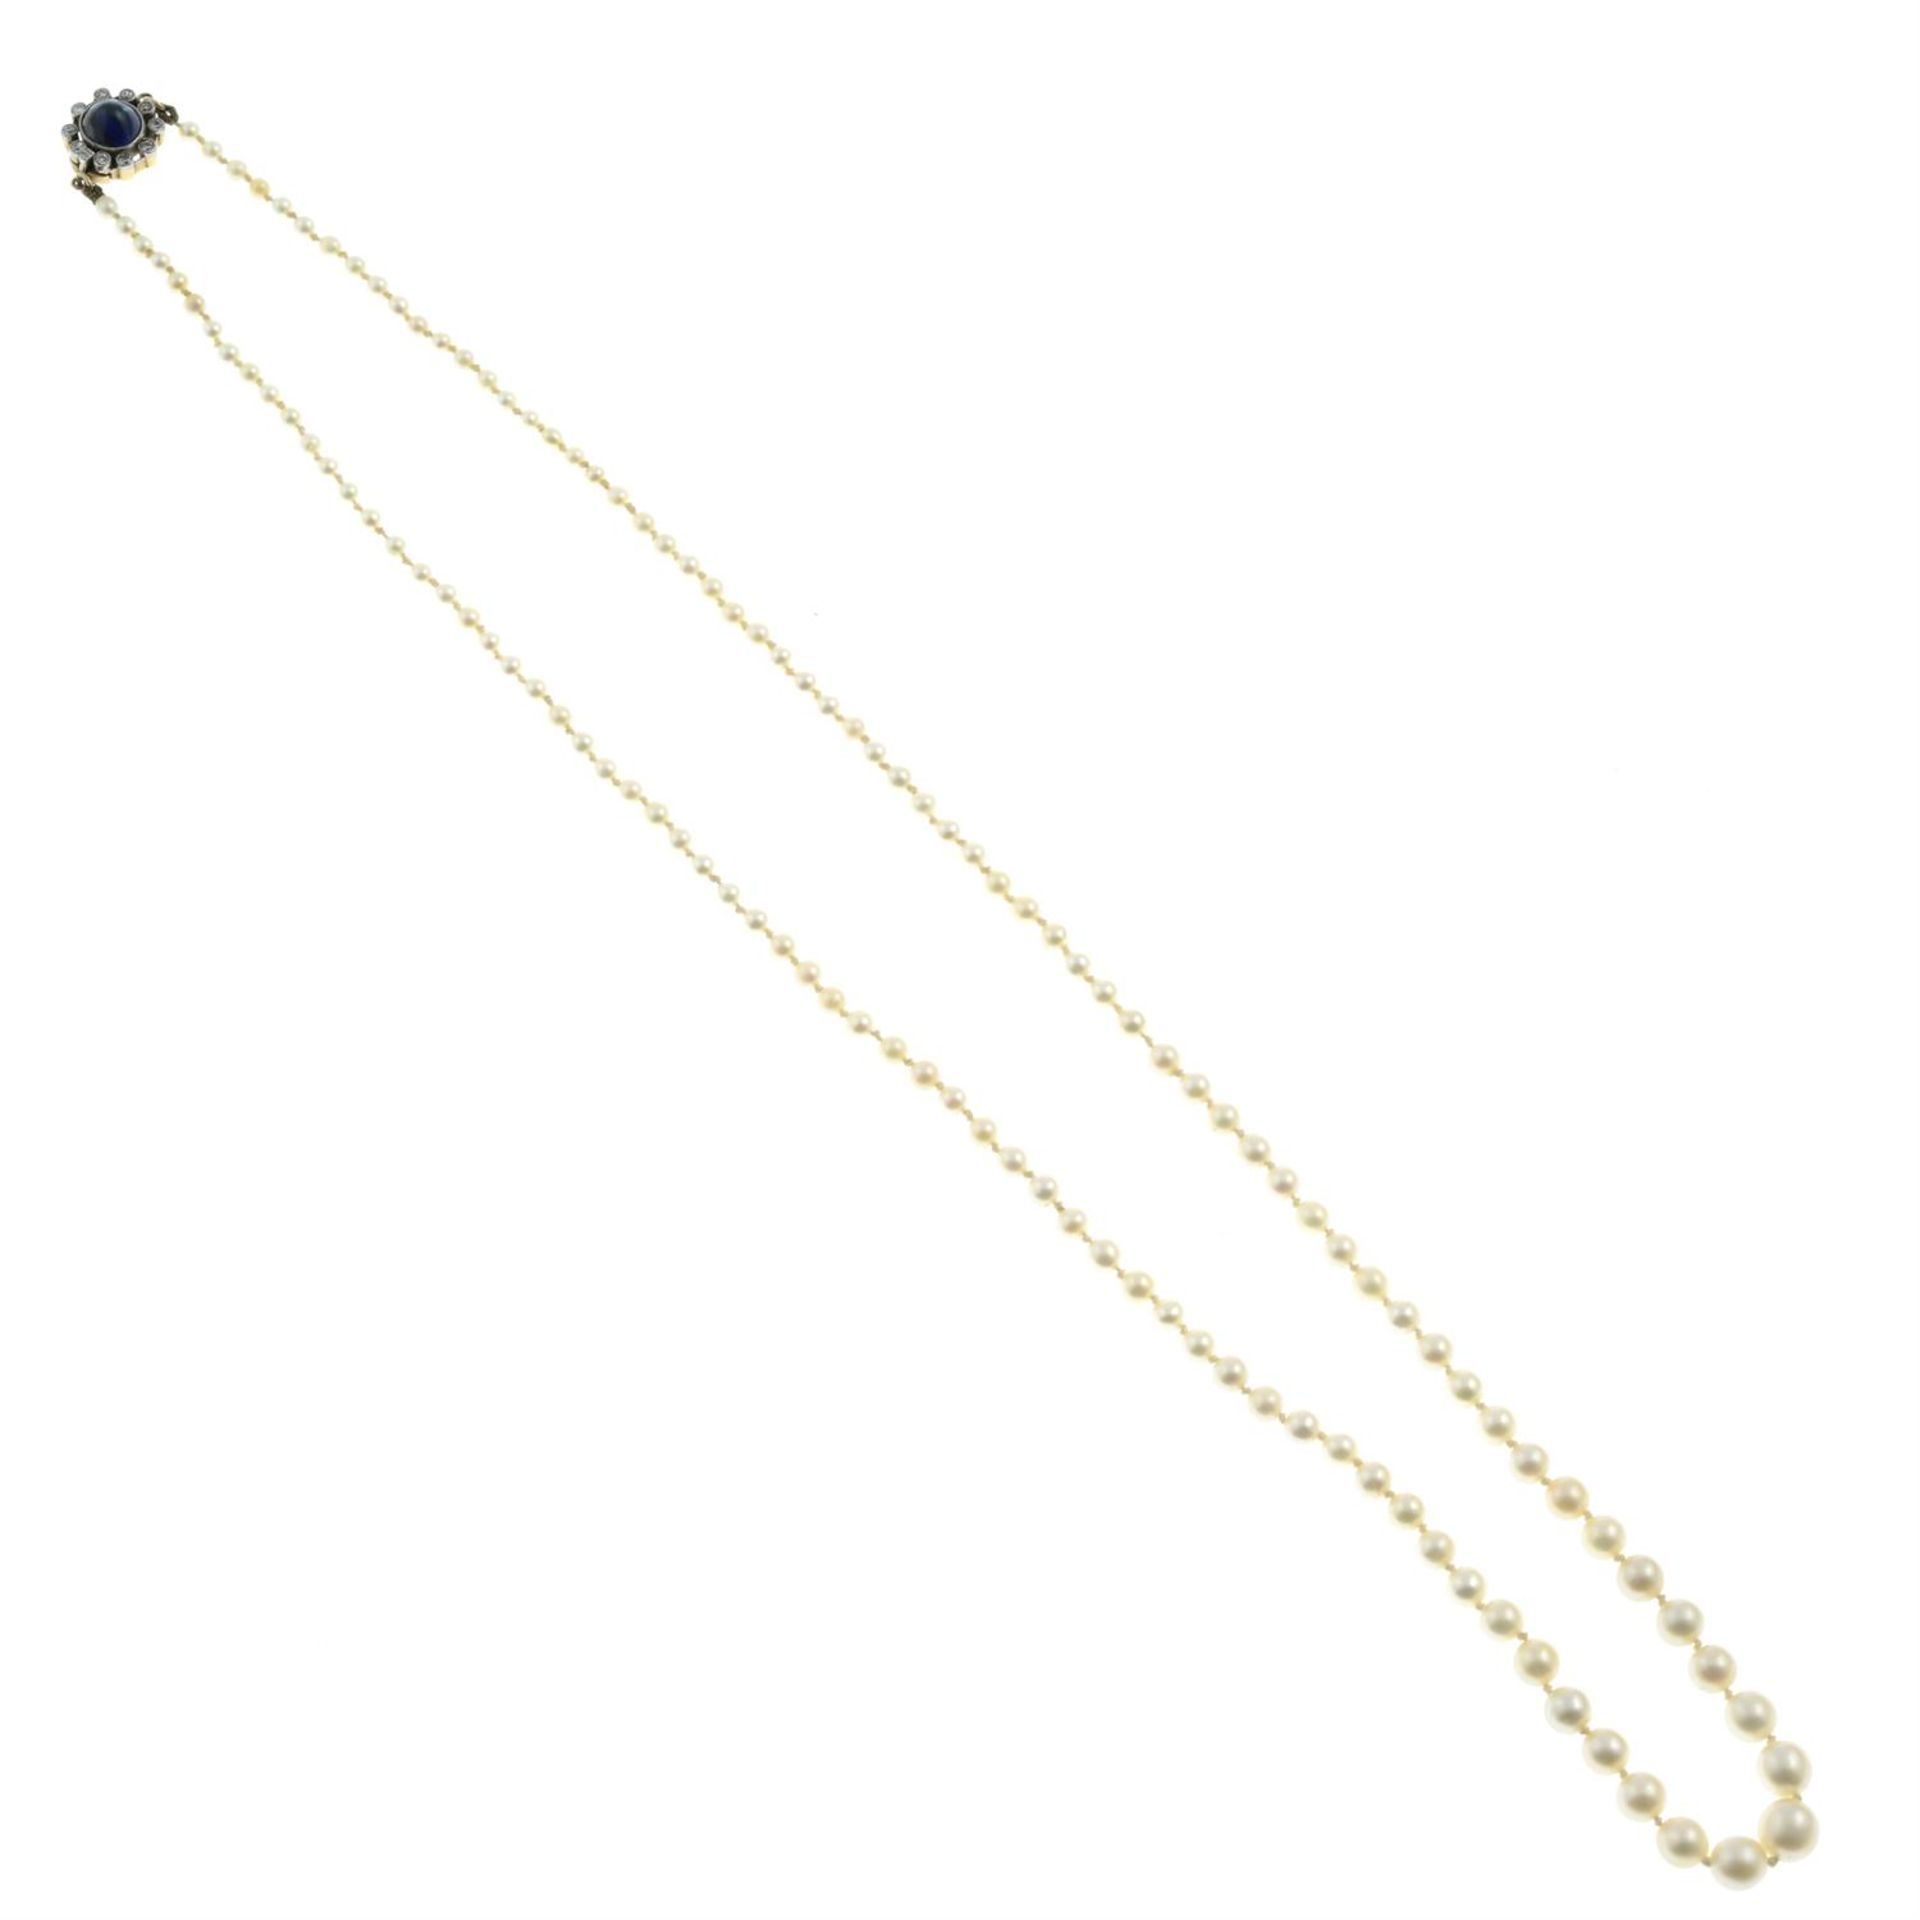 An early 20th century graduated pearl single-strand necklace, with sapphire cabochon and single-cut - Image 3 of 5